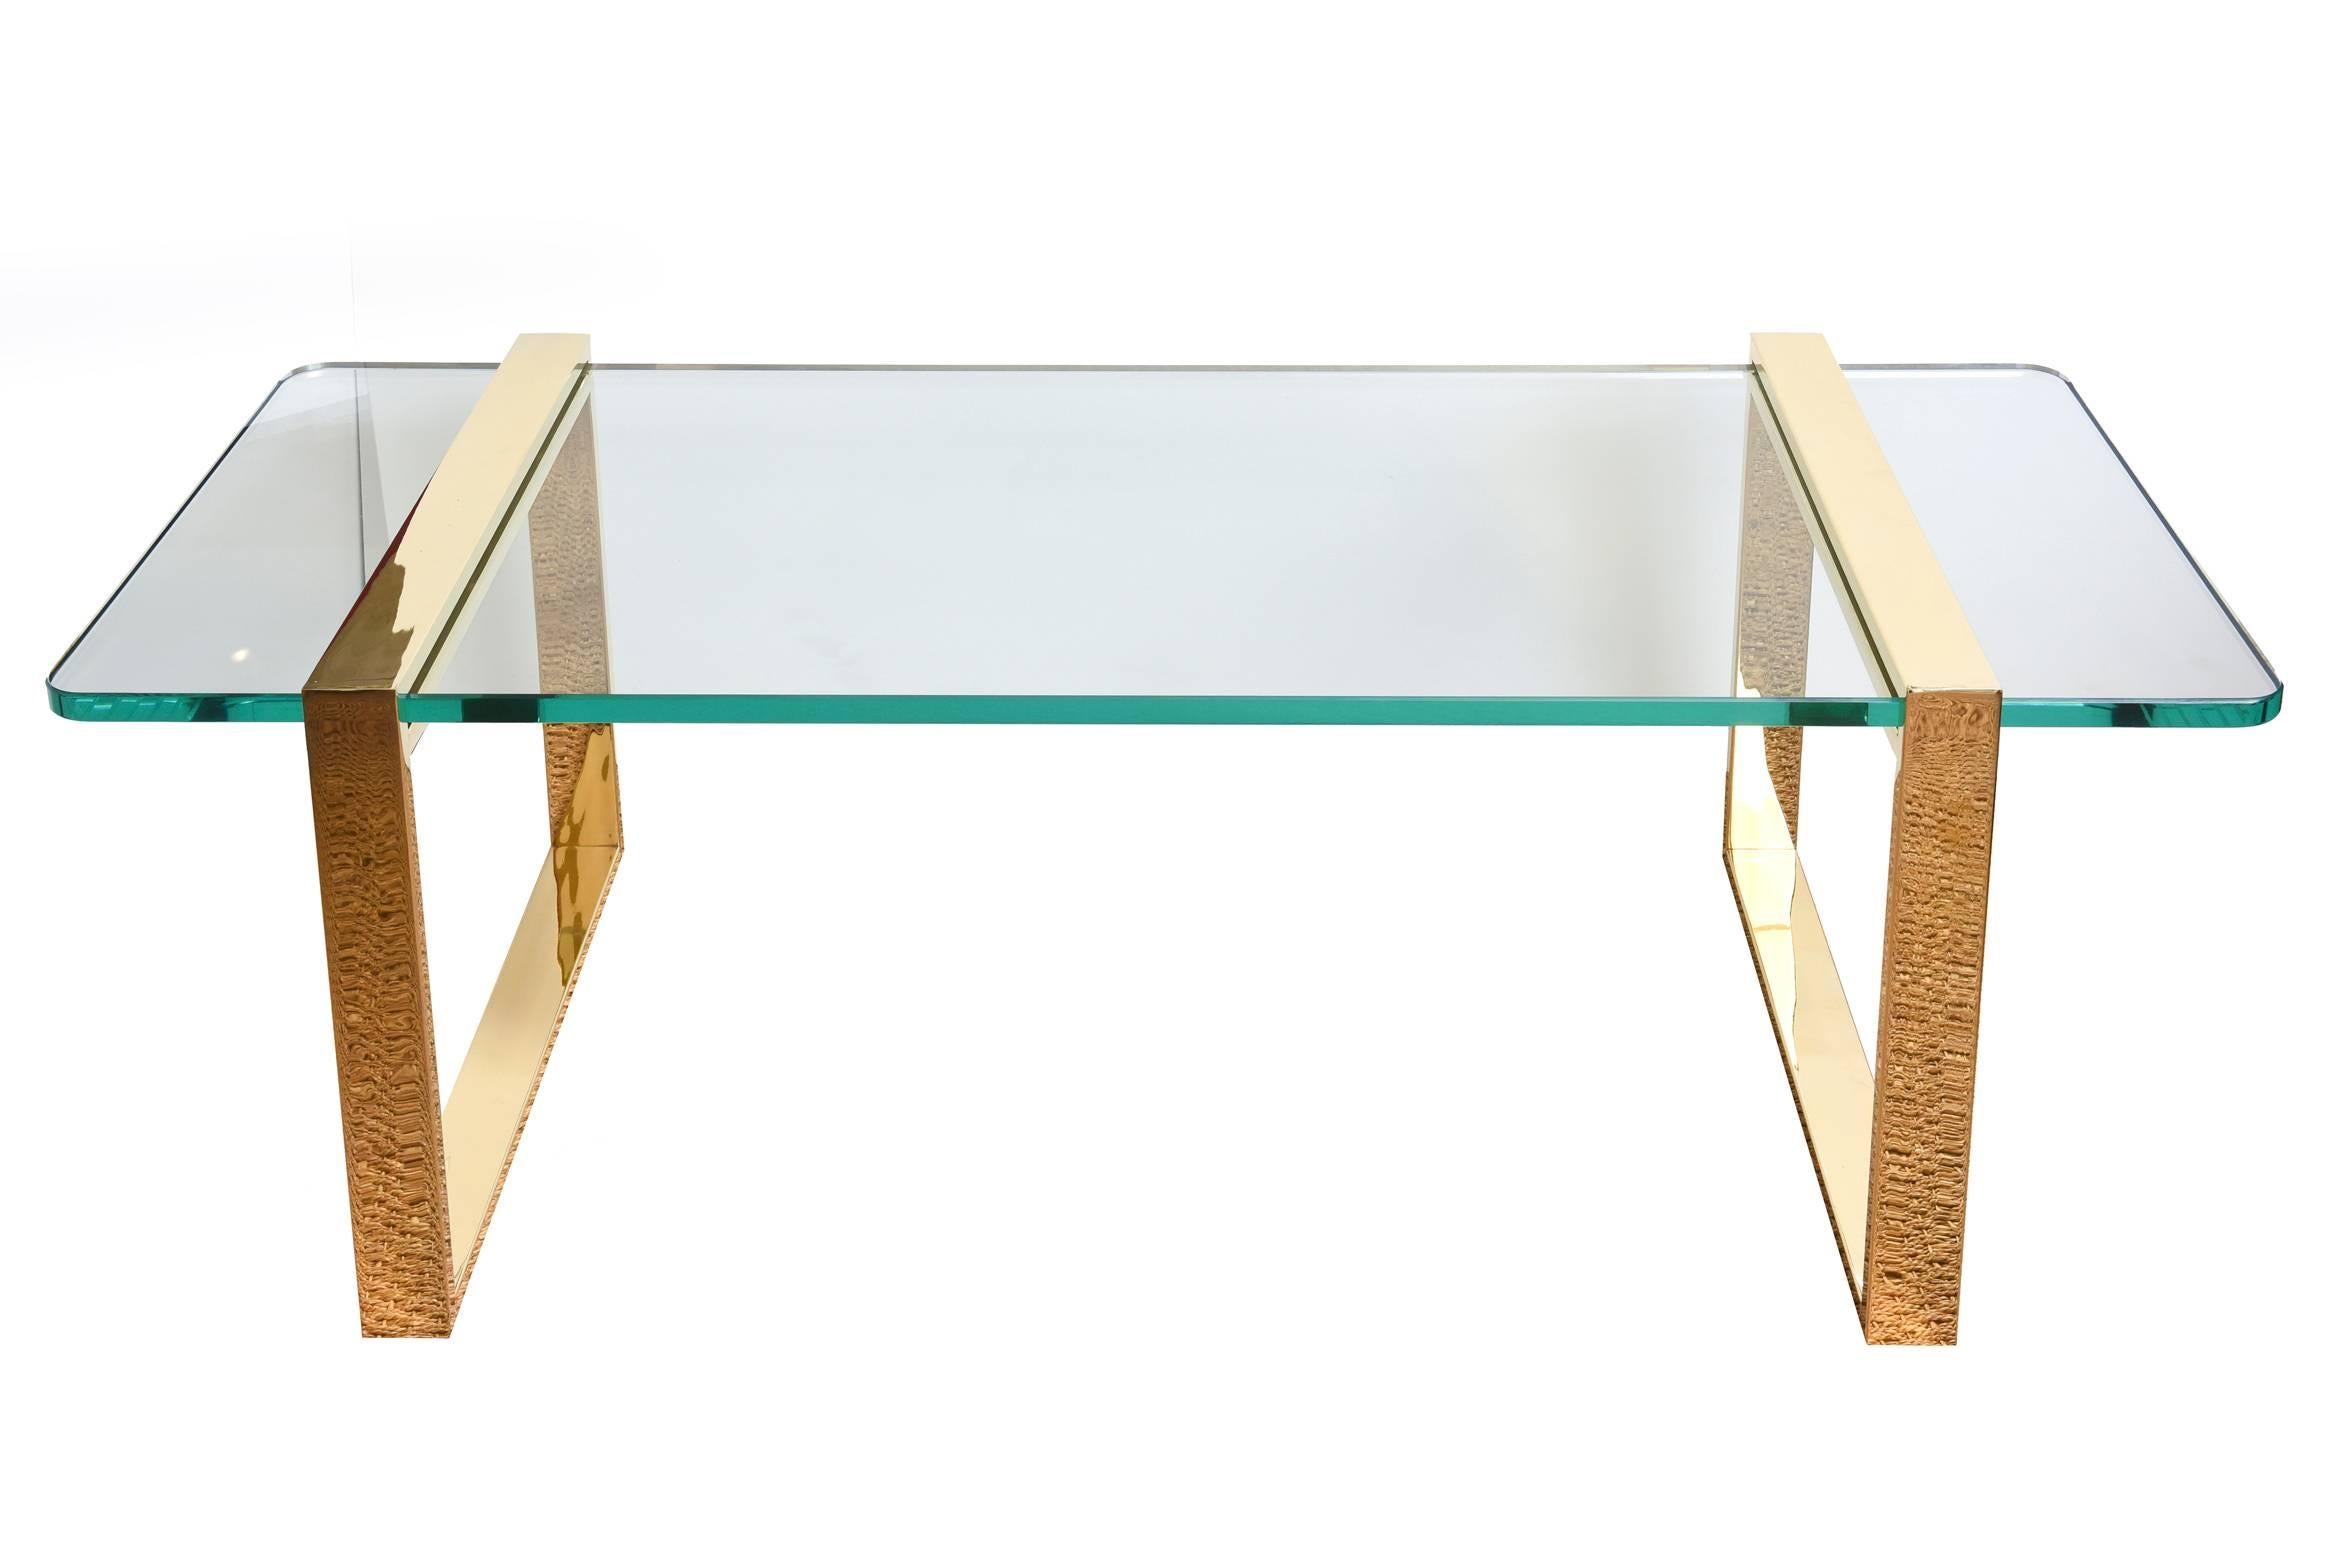 This modernist and Minimalist stunning Leon Rosen for Pace real 24-karat gold-plated cocktail table and or library table has two elegant squares that slide into the glass. They are attached and tightened underneath. This is a piece of sculpture, of